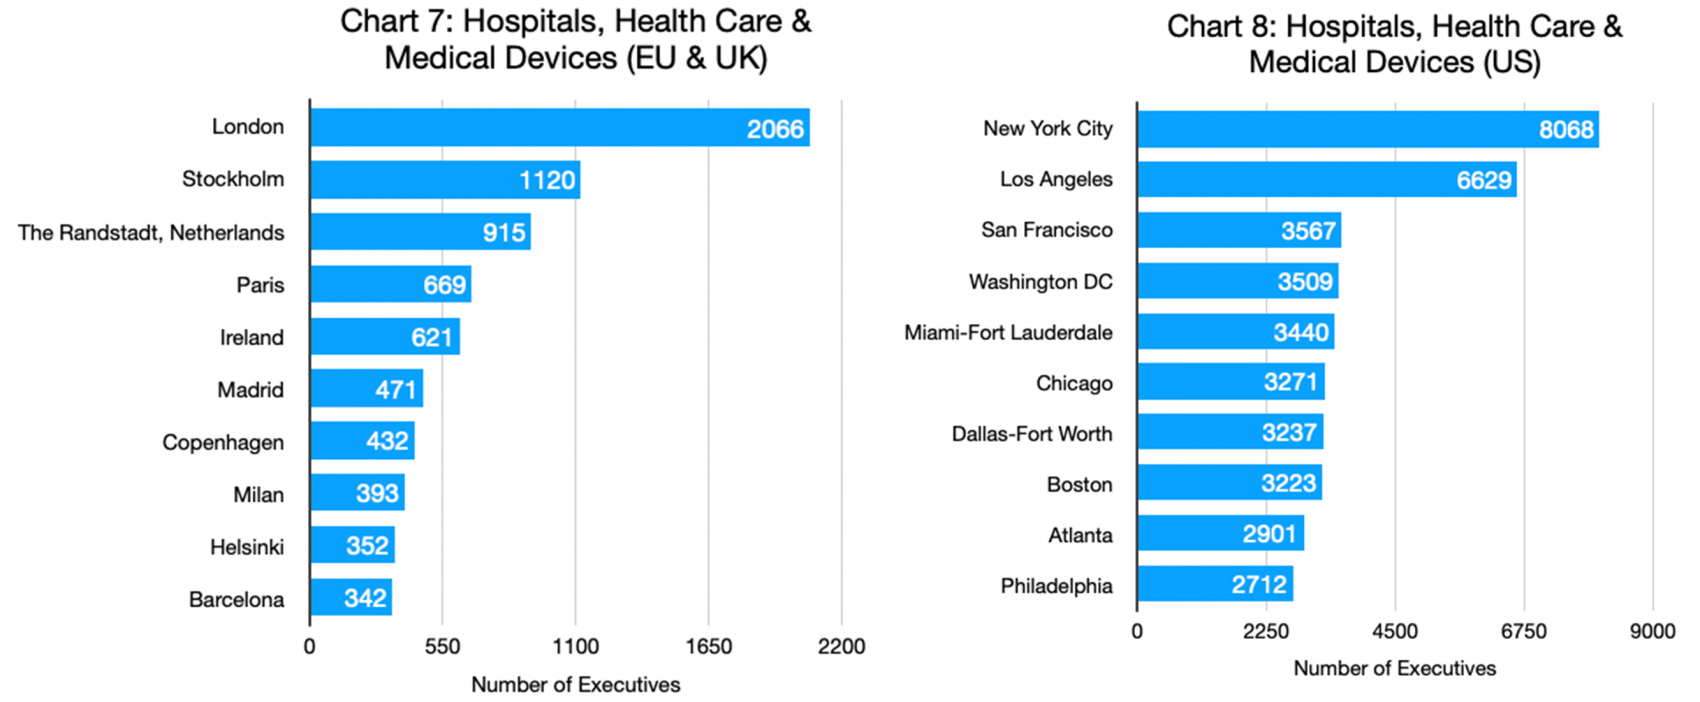 Charts 7 & 8 - Hospitals, Health Care & Medical Devices_EU & UK and US